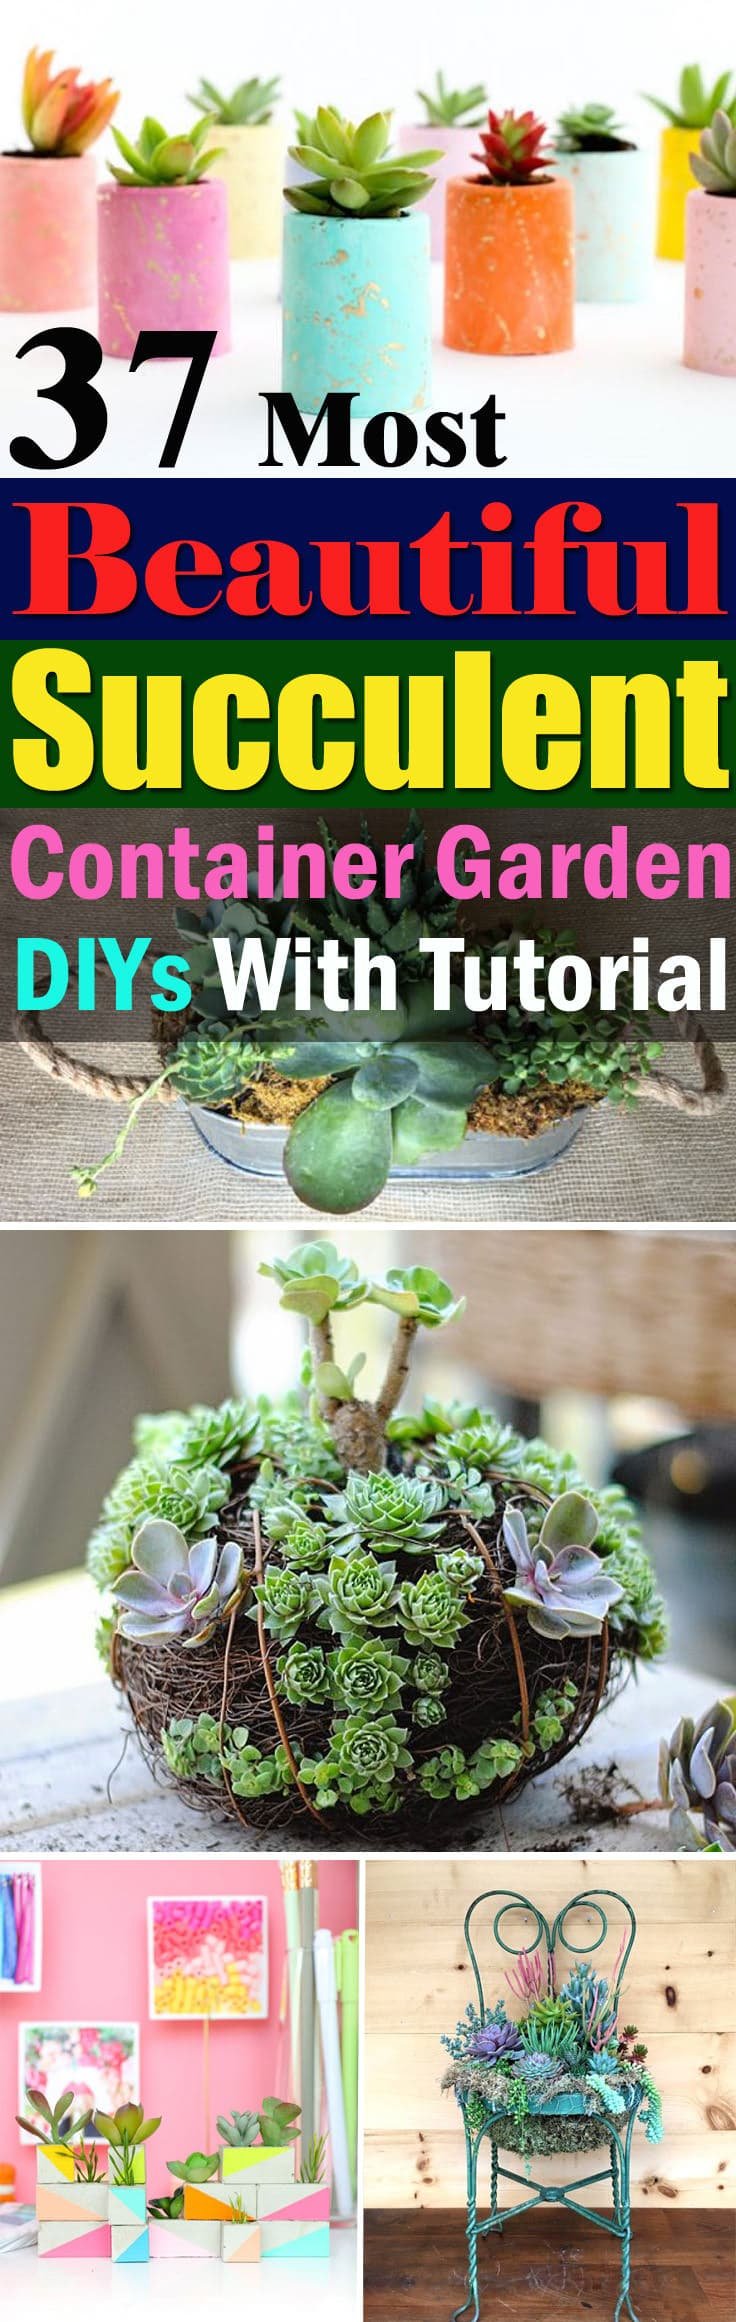 Be creative with the colorful succulents when arranging them, learn these 37 DIY Succulent Container Garden Ideas!